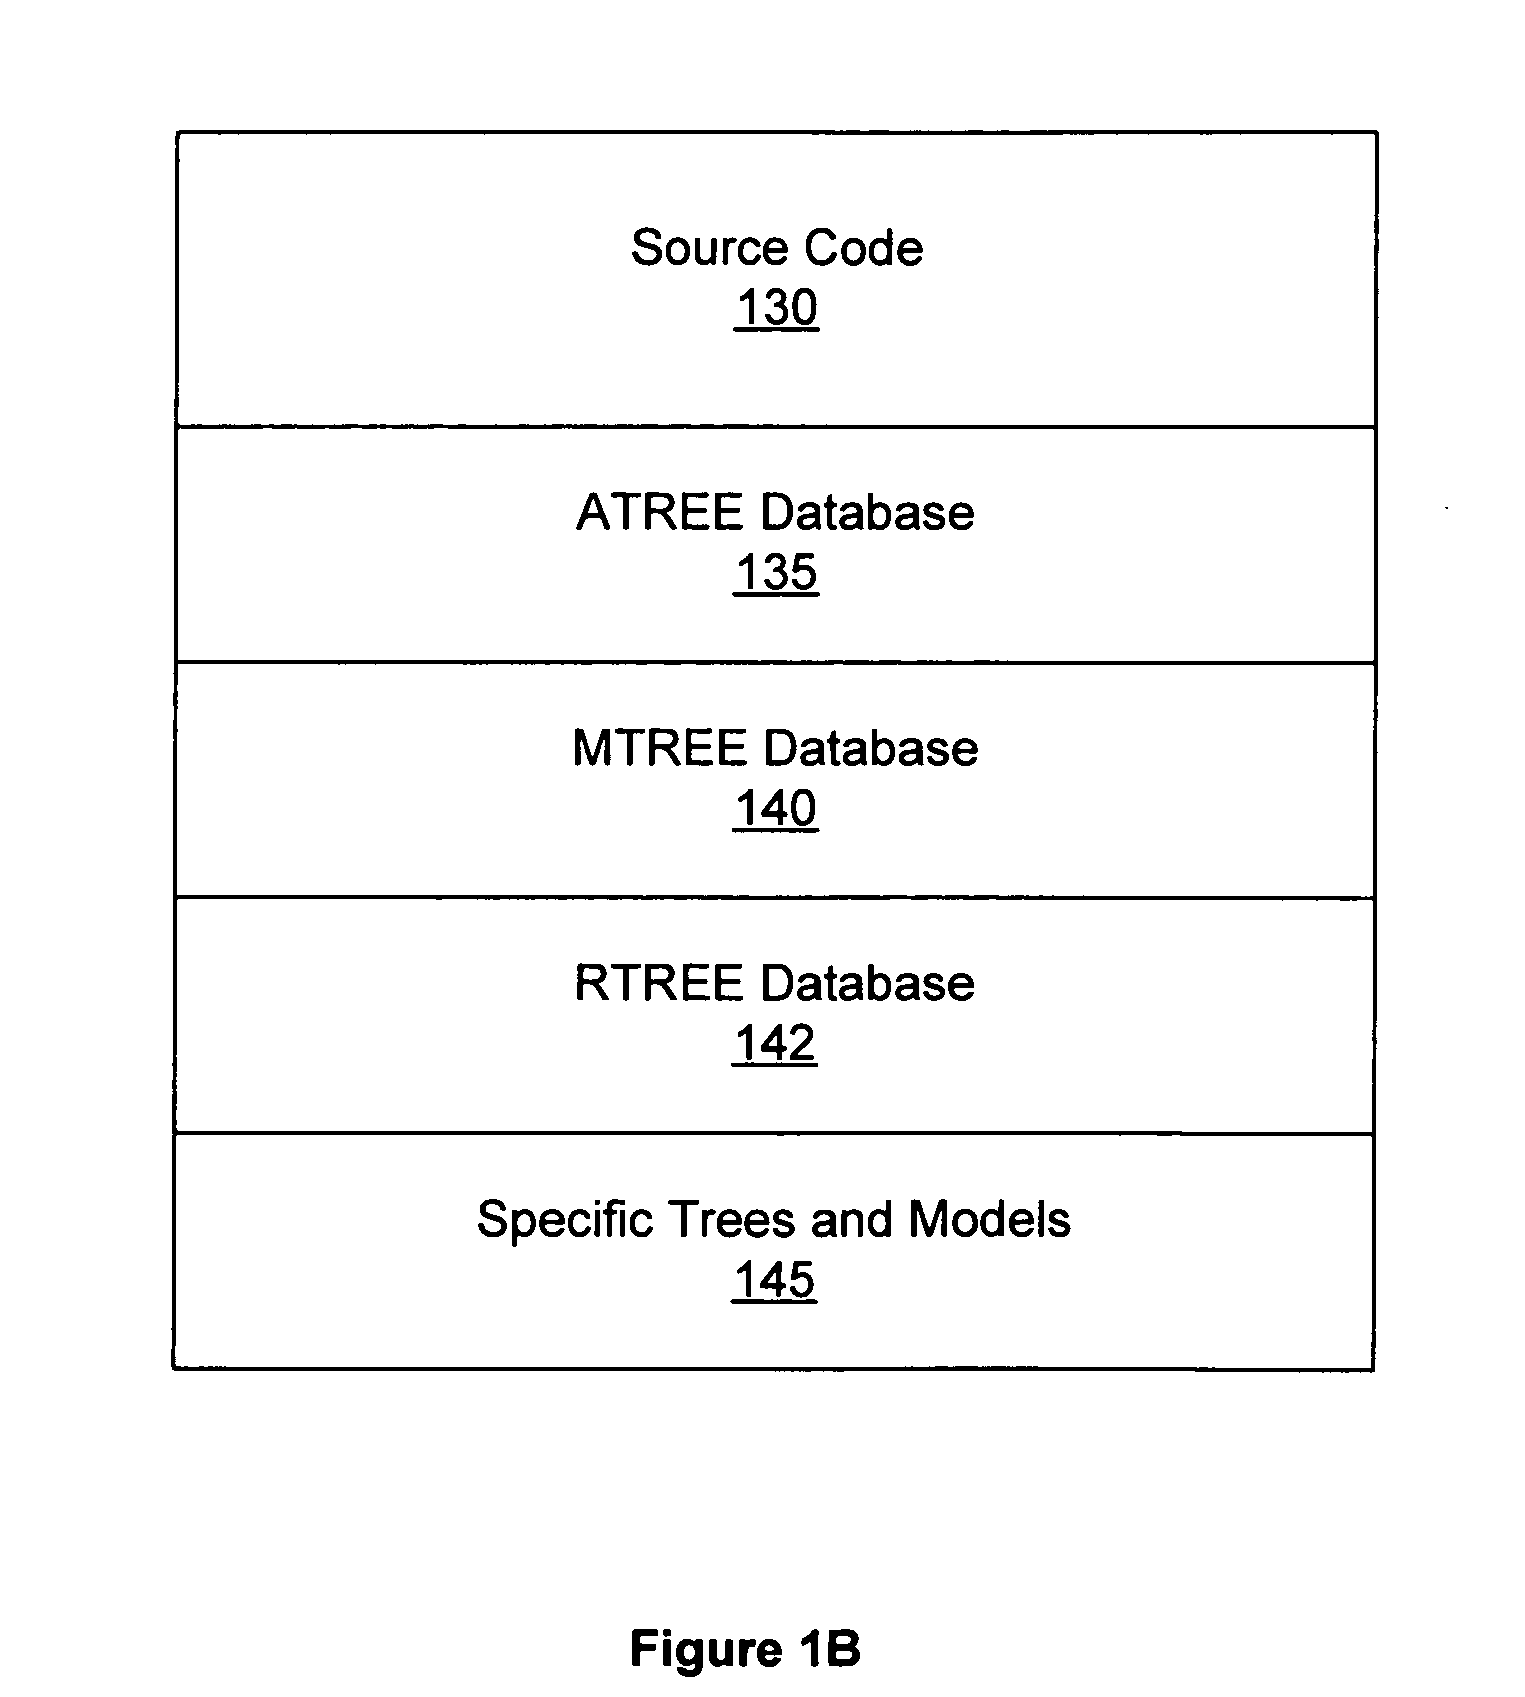 Building integrated circuits using a common database